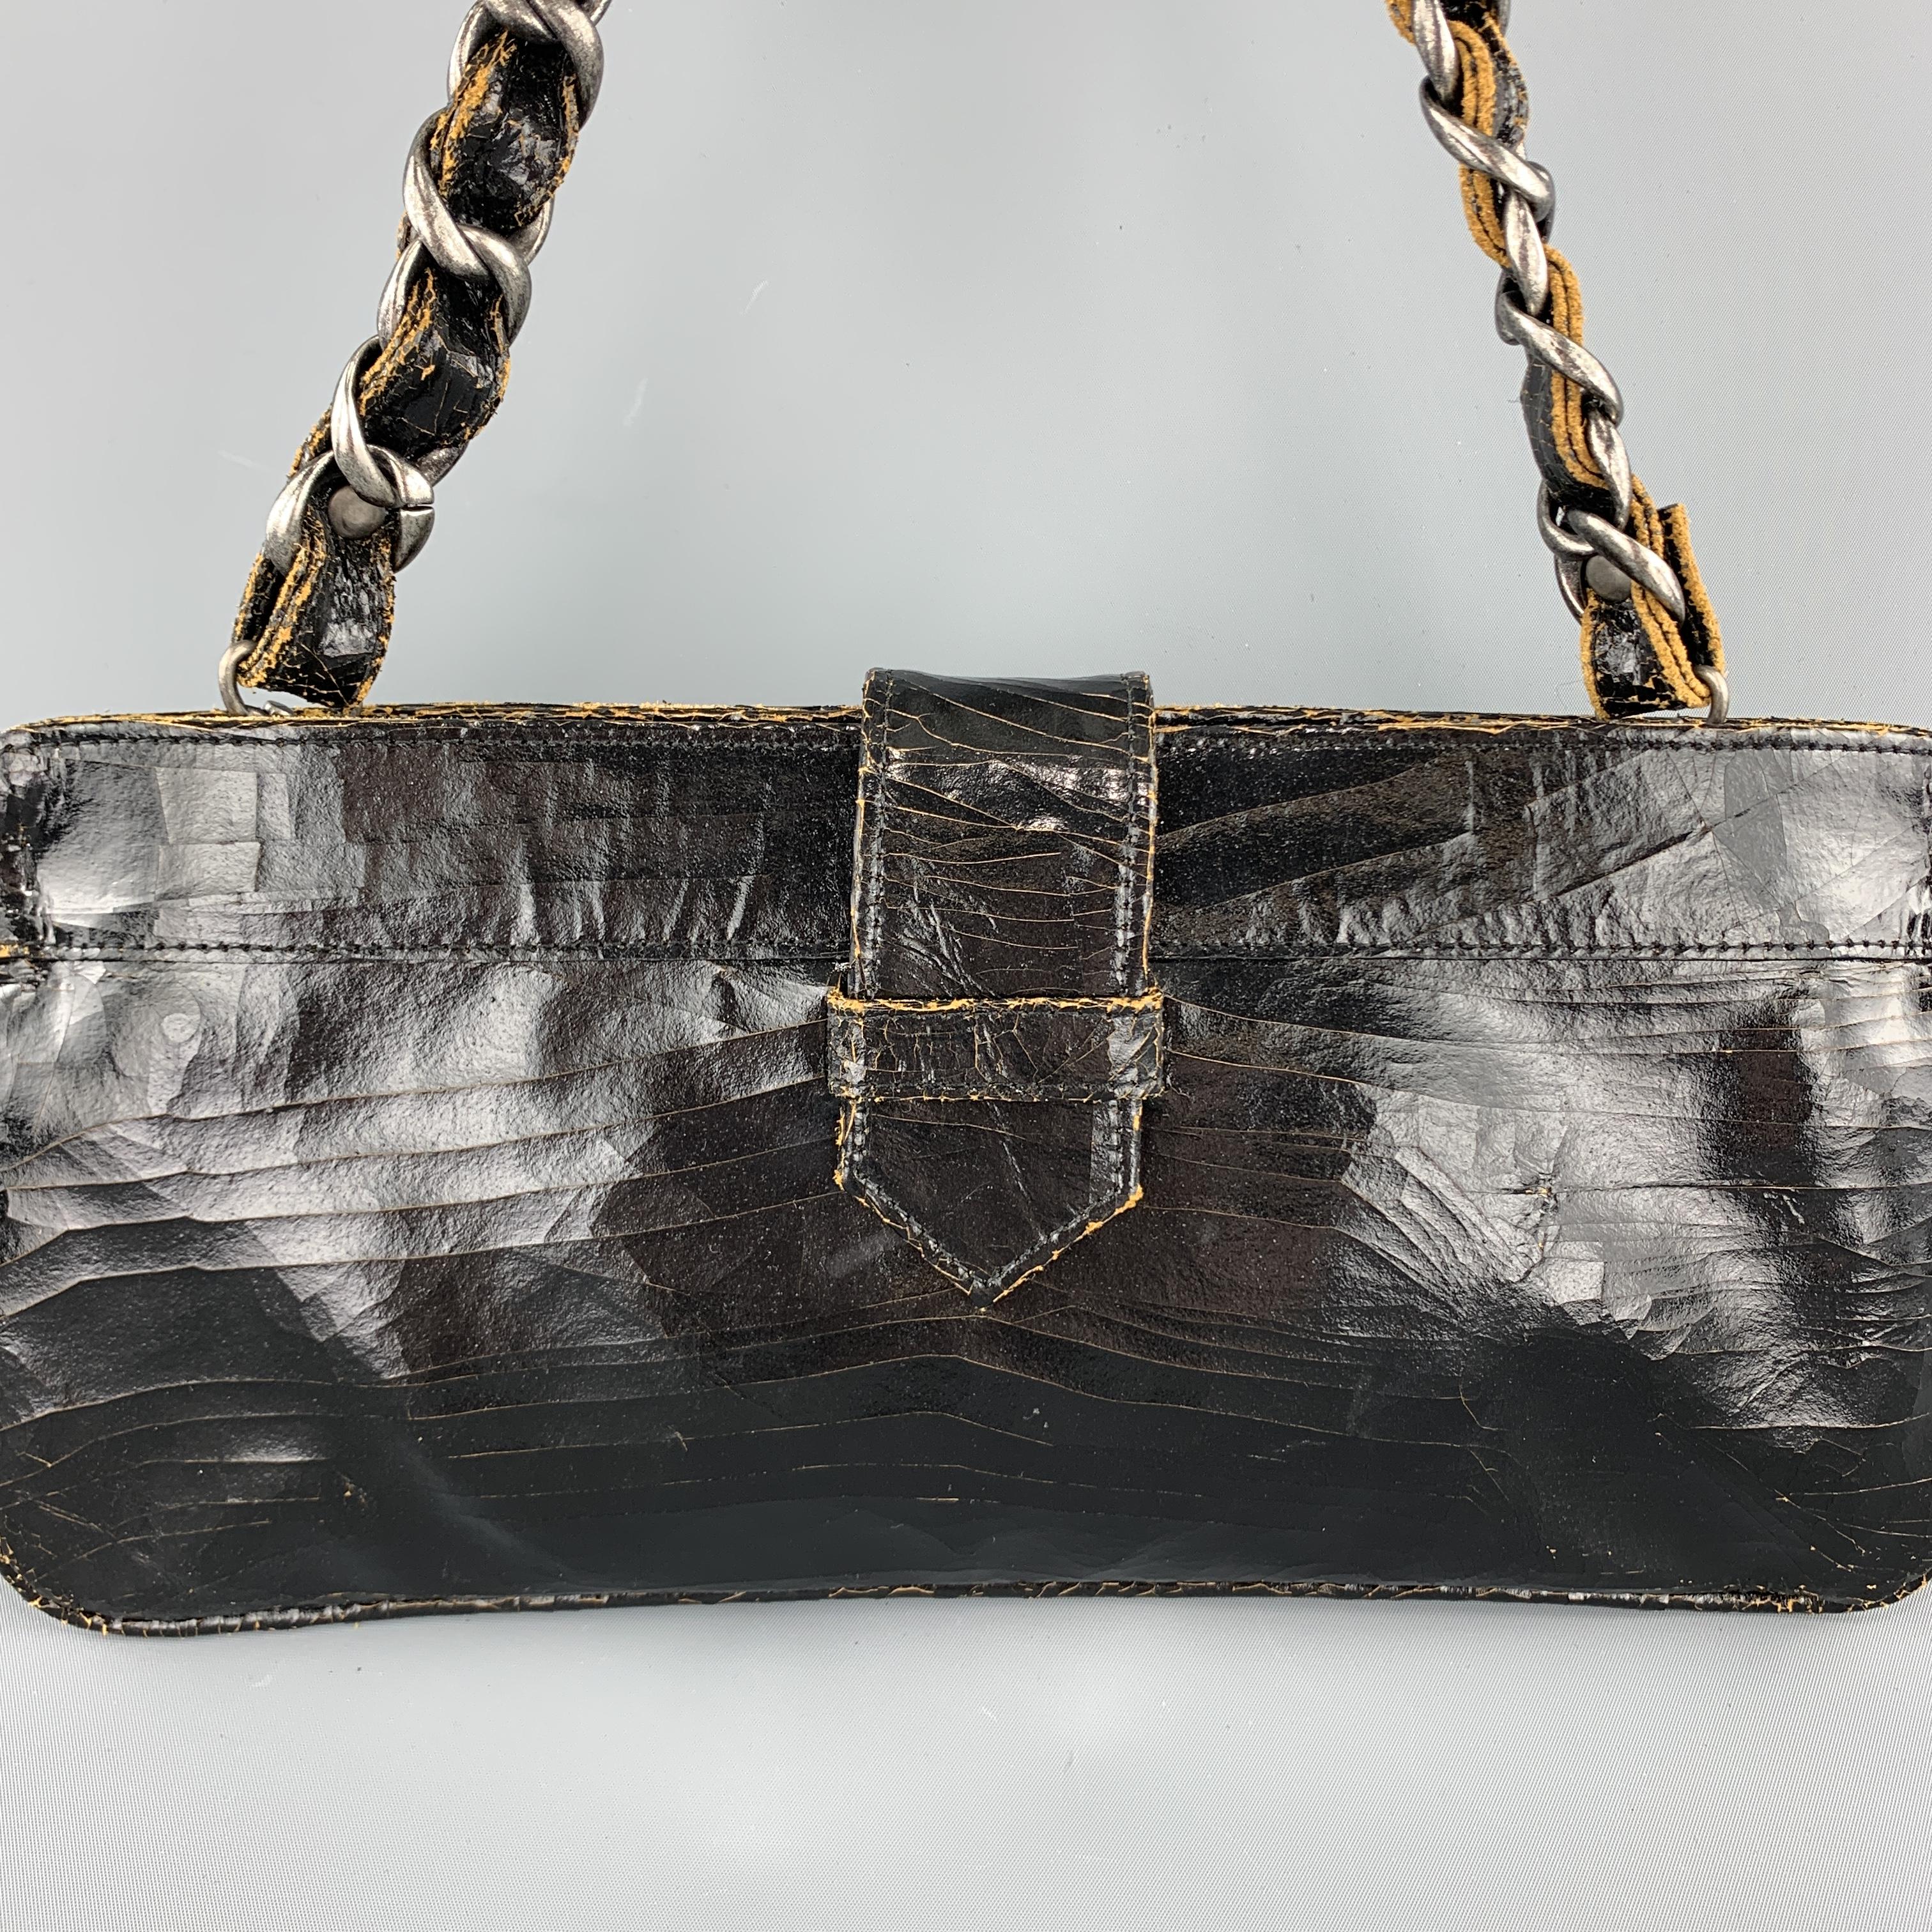 MARC MARMEL bag comes in tan leather with all over crackle distressed black glossy coating with magnetic top closure, flap strap, and detachable woven chain shoulder strap. Made in USA. 

Excellent Pre-Owned Condition.

Measurements:

Length: 13